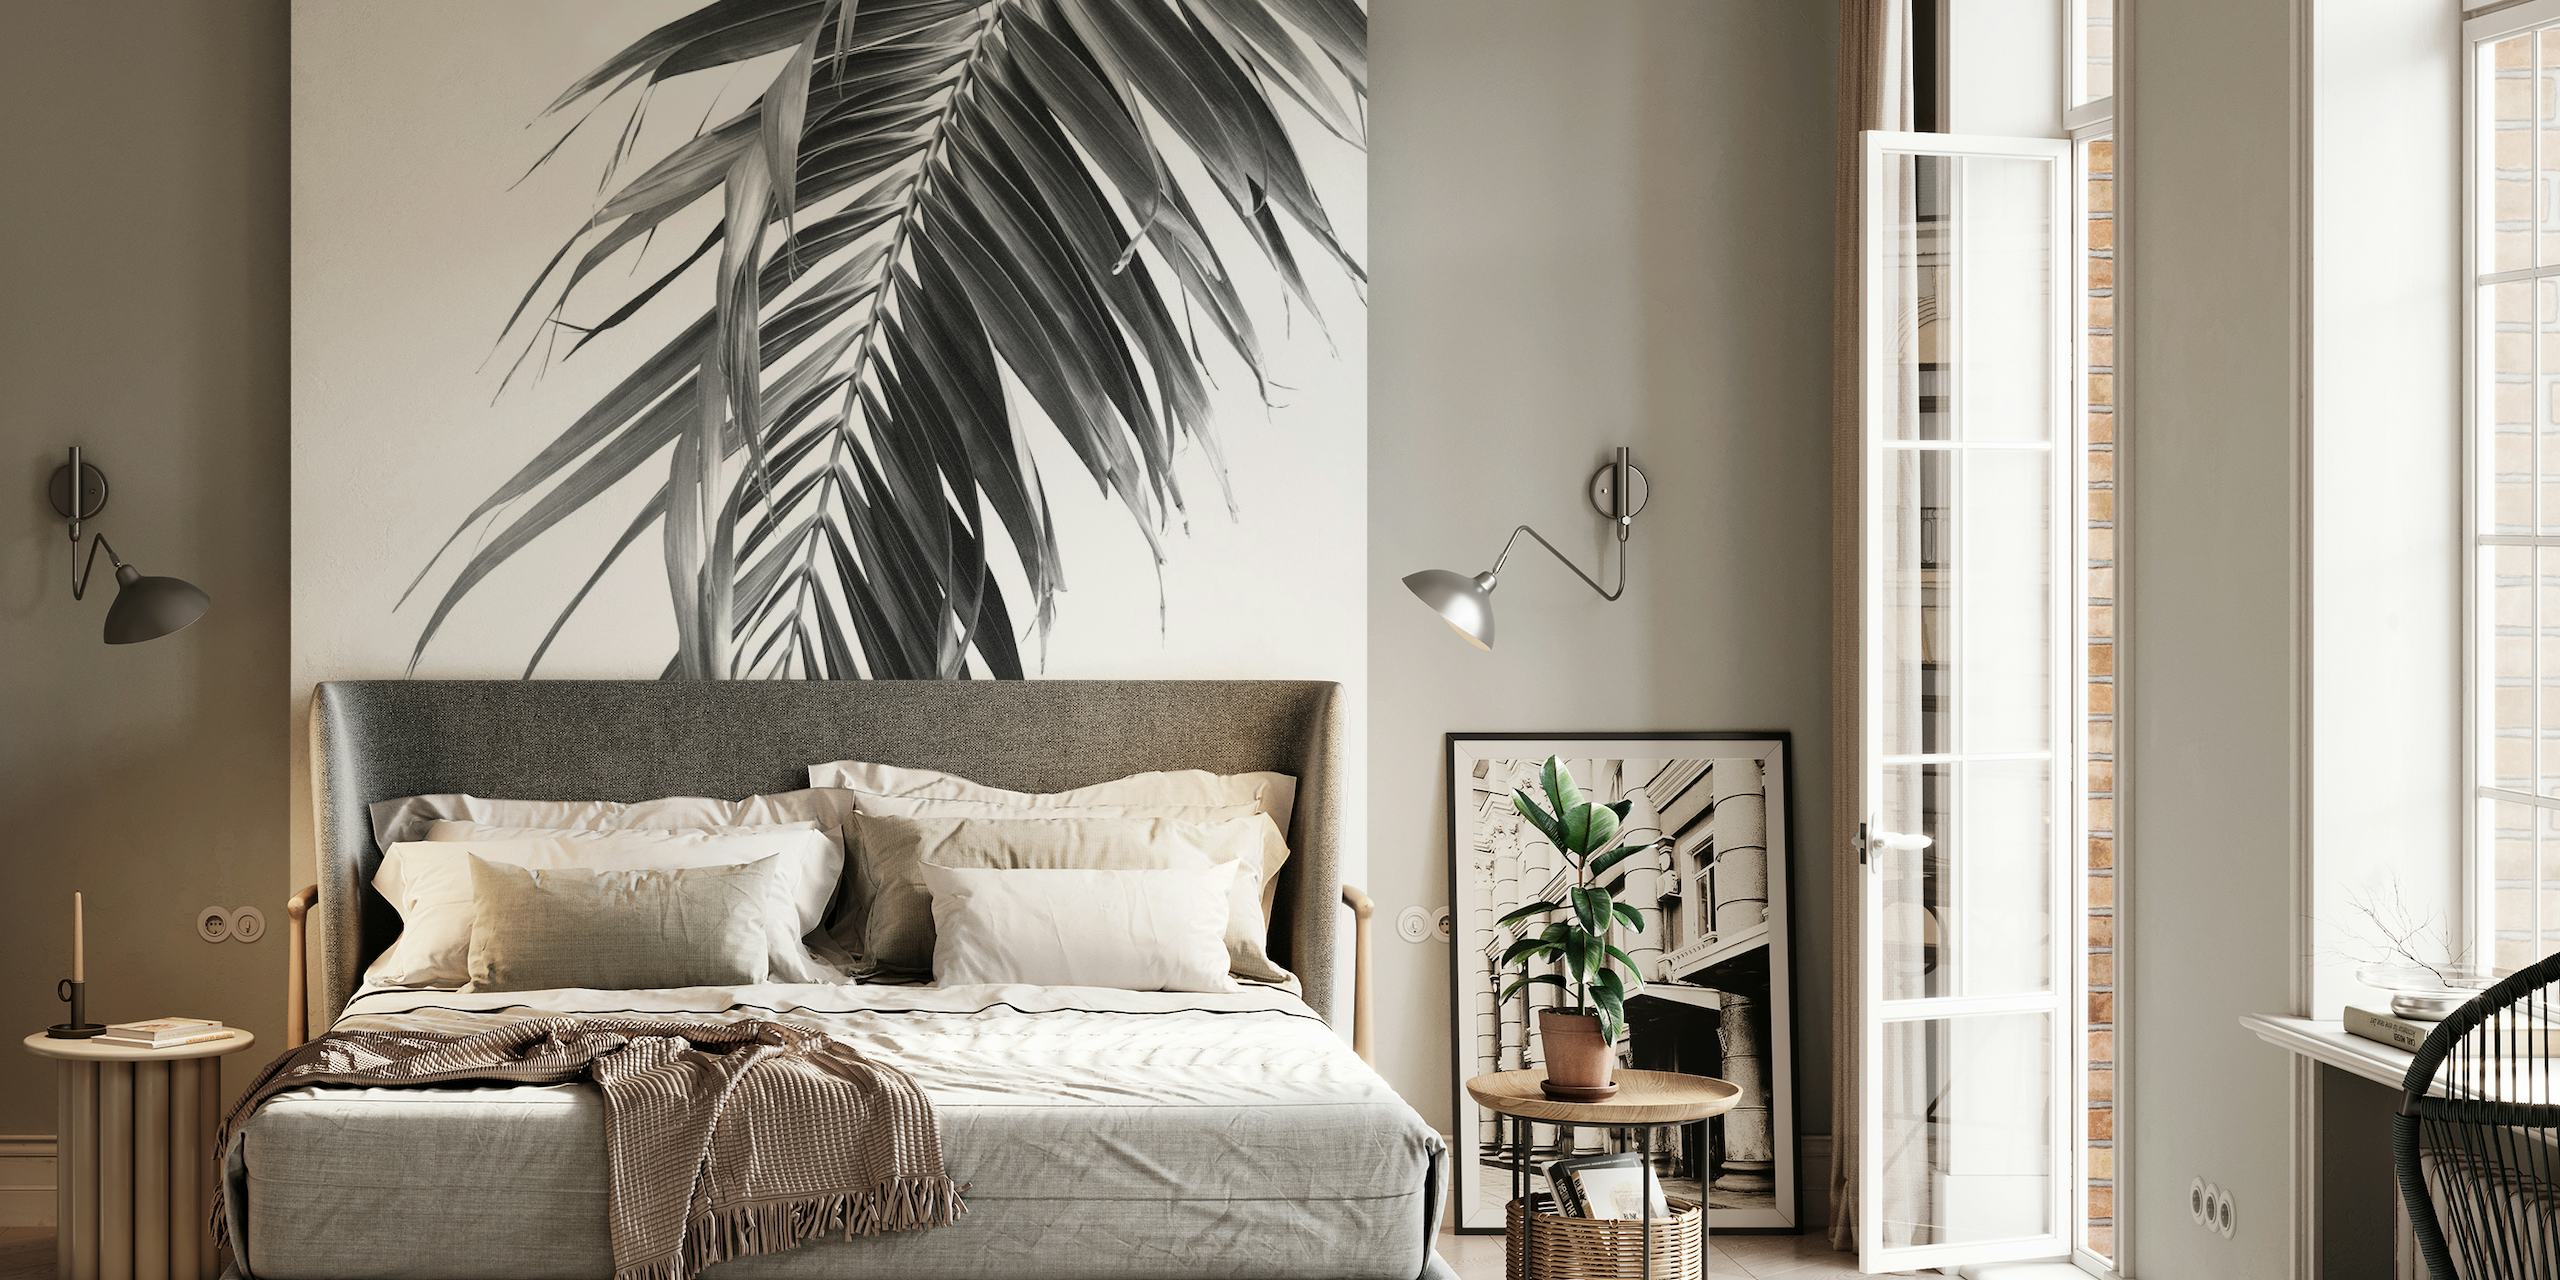 Palm Leaf Jungle wall mural with shades of green and intricate leaf designs